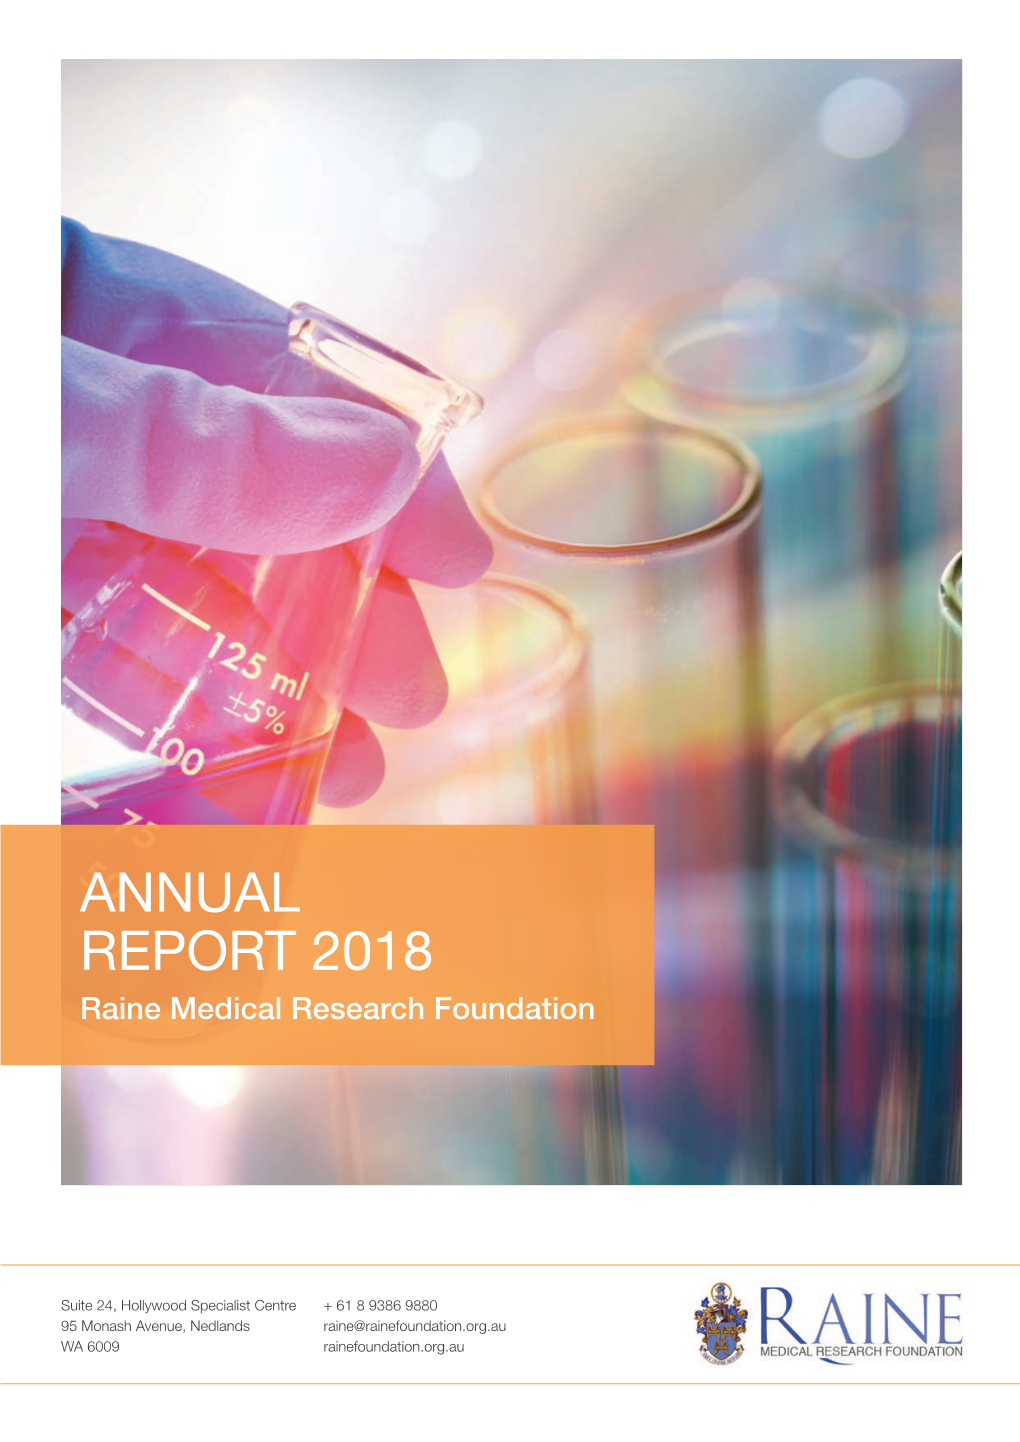 ANNUAL REPORT 2018 Raine Medical Research Foundation